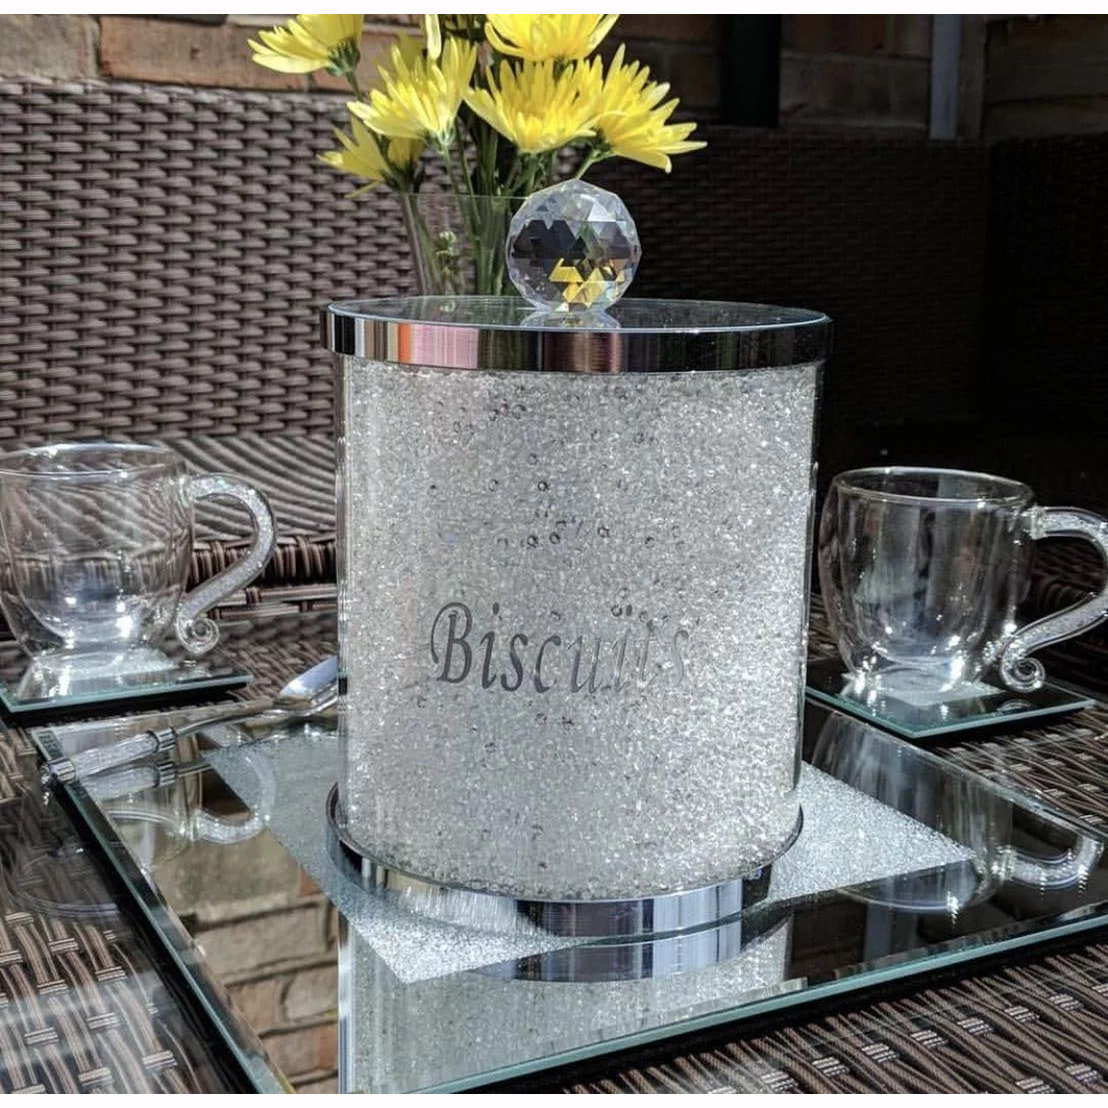 Biscuit Jar (crushed ice)